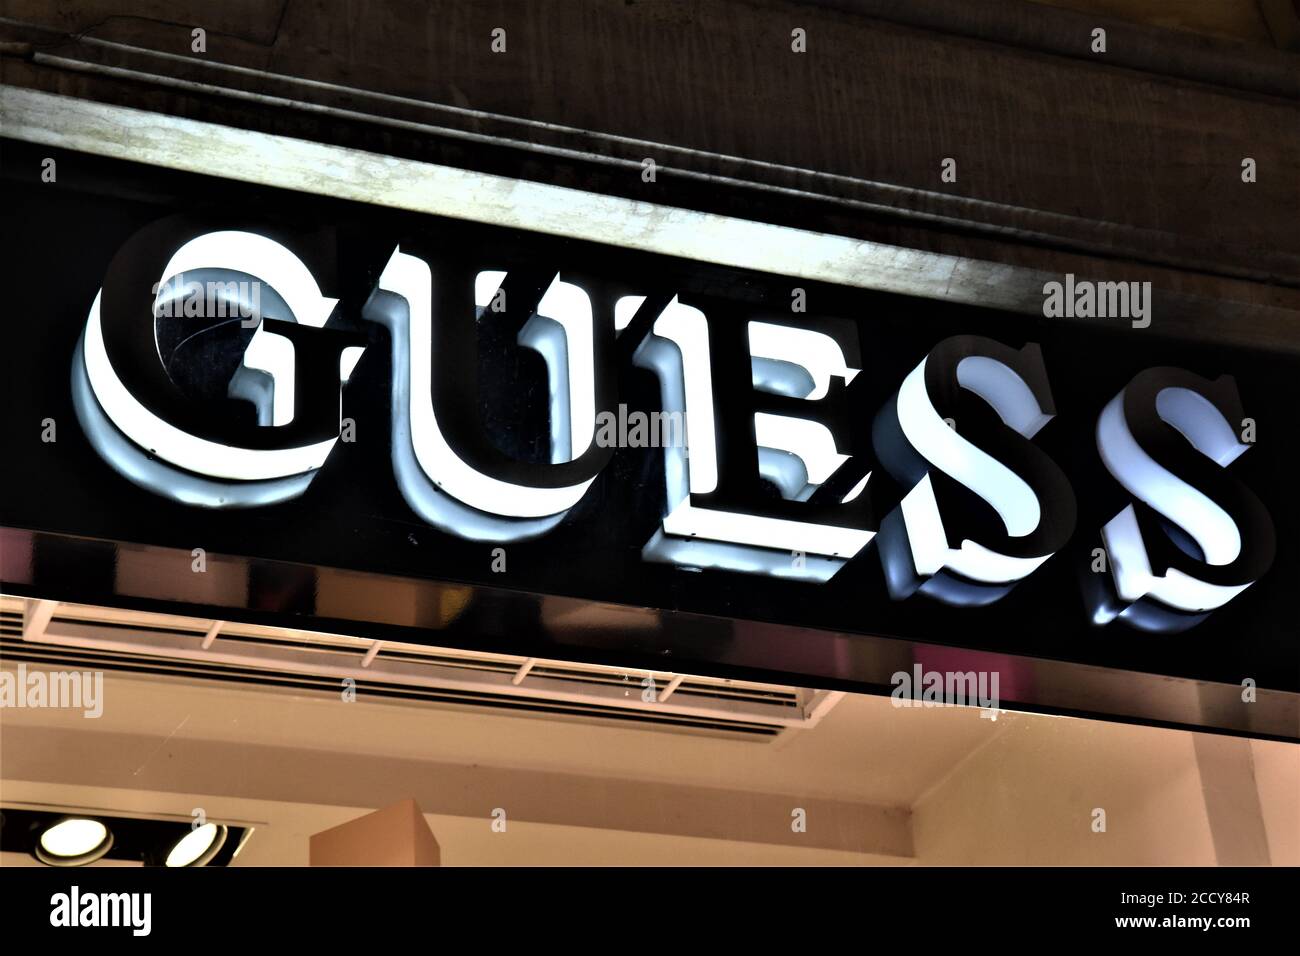 THE SIGNATURE OF GUESS BOUTIQUE Stock Photo - Alamy